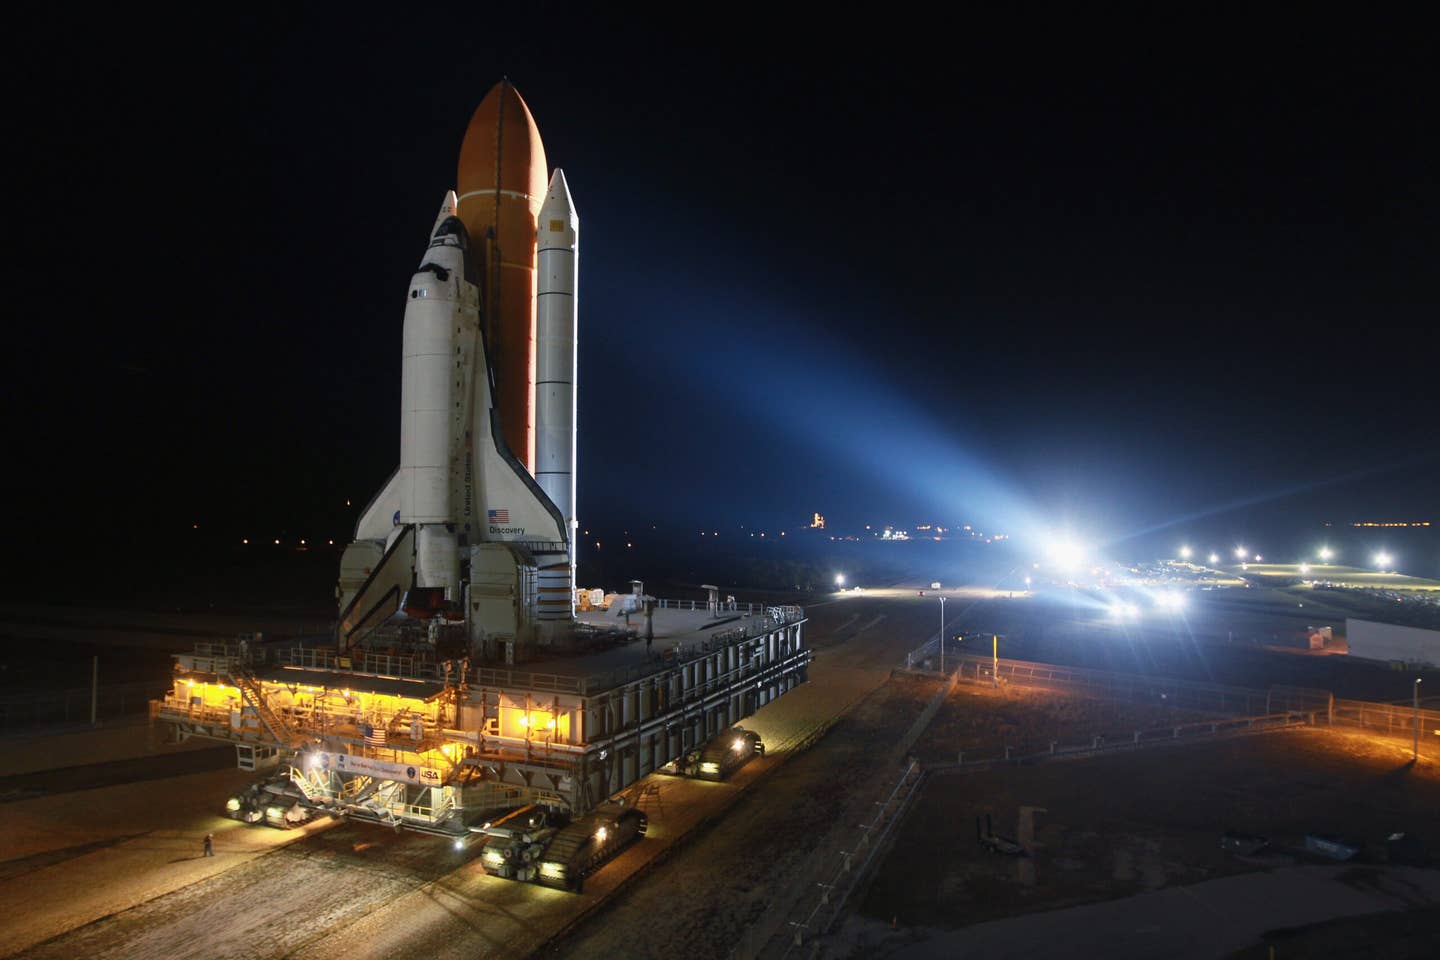 Space shuttle Discovery rolls to the launch pad after emerging from NASA's vehicle assembly building atop a crawler transporter at Kennedy Space Center in 2011. <em>Joe Raedle/Getty Images</em>